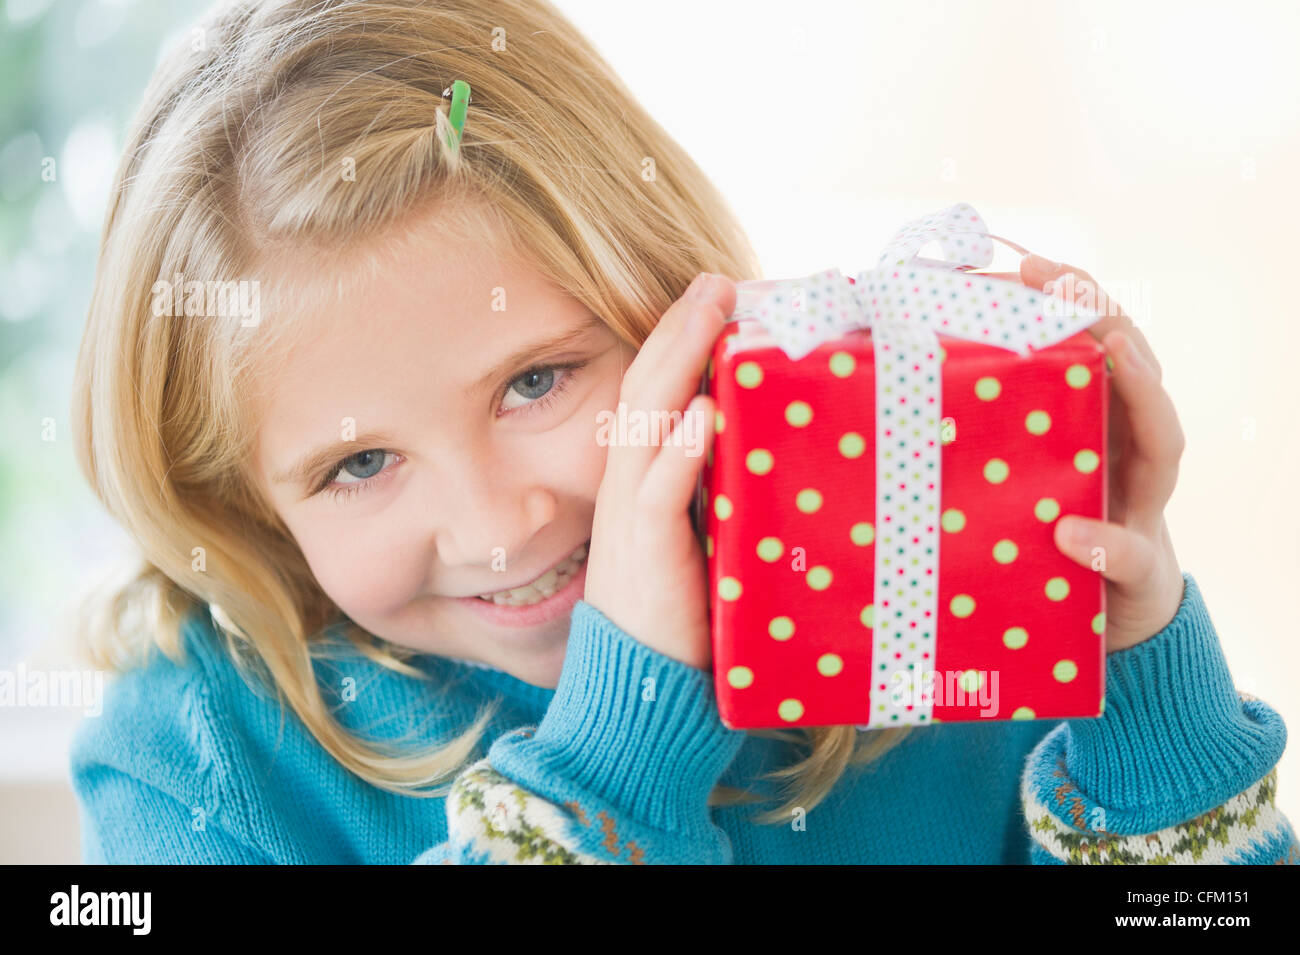 USA, New Jersey, Jersey City, Portrait of smiling girl (8-9) holding gift Banque D'Images